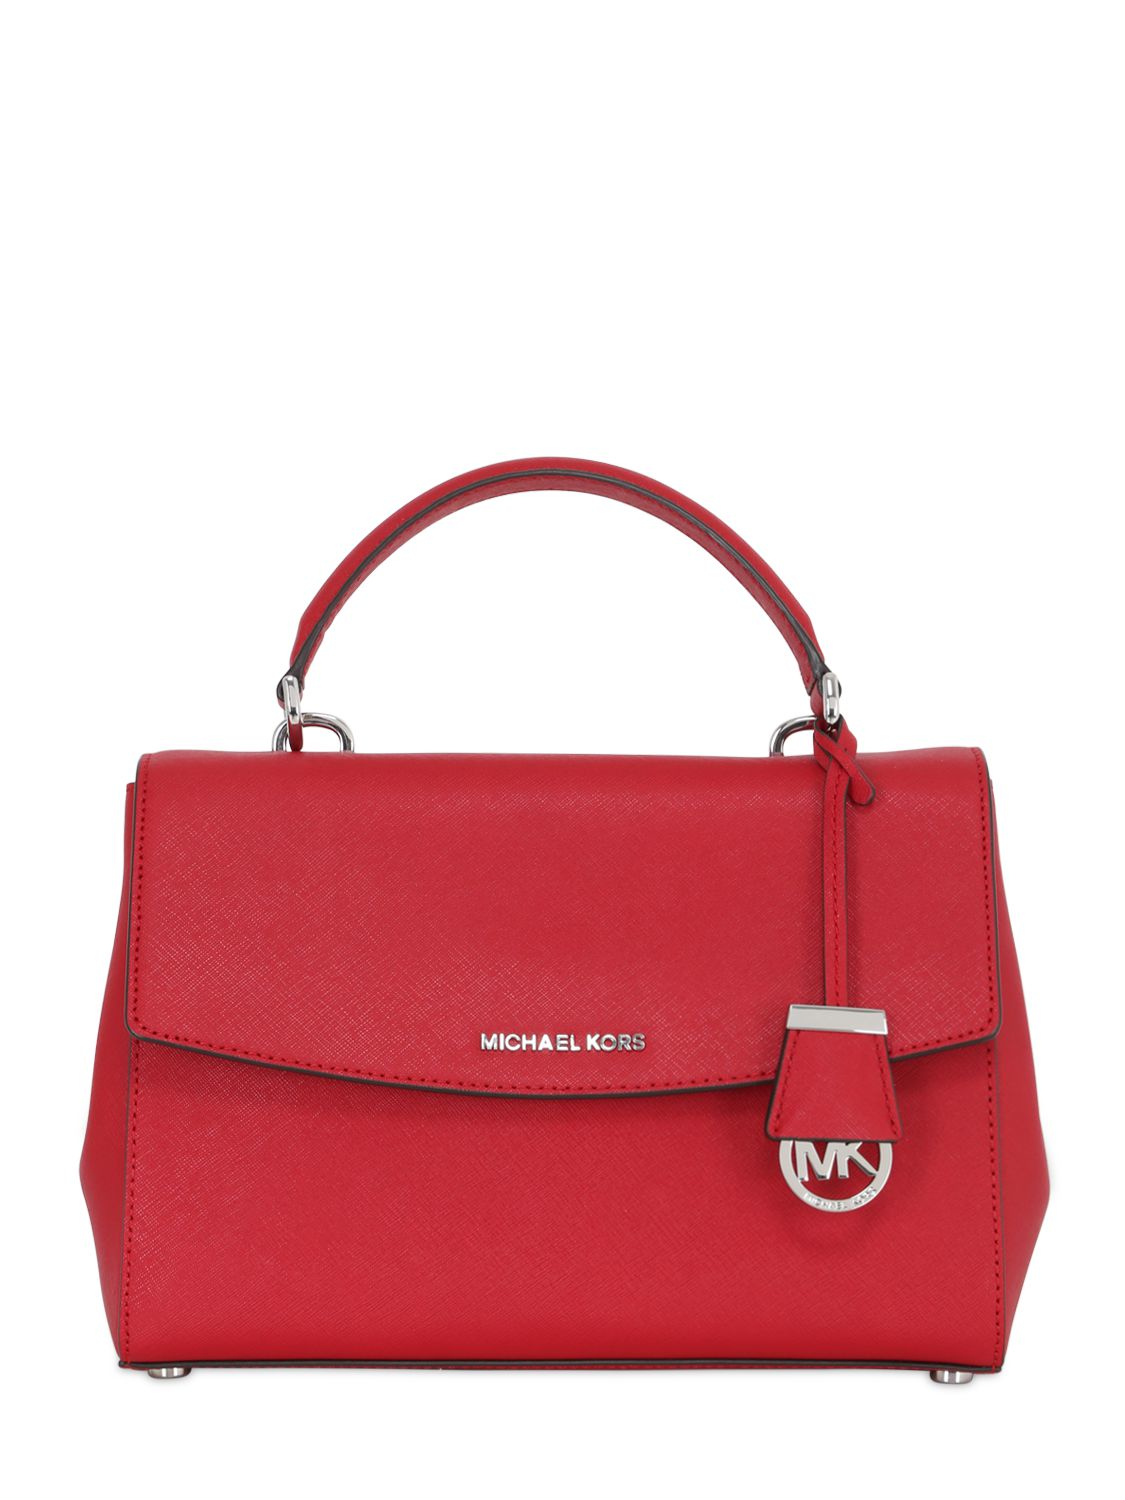 MICHAEL Michael Kors Ava Saffiano Leather Top Handle Bag in Red - Lyst